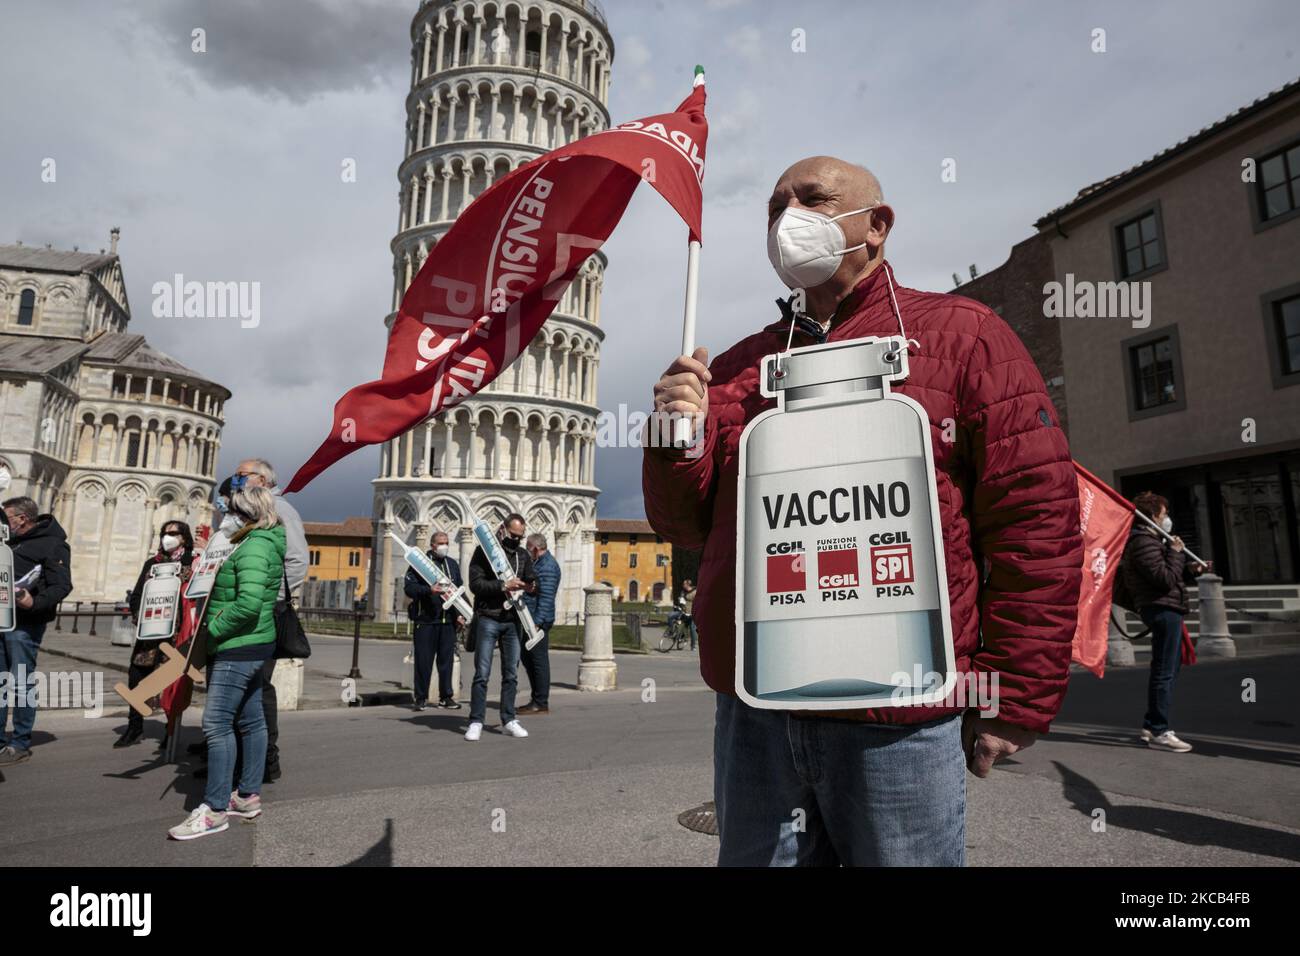 A retired man standing with a cardboard sign of the shape of a covid vaccine in front of the leaning tower in Pisa, Italy, on March 18, 2021. CGIL, The main trade union of Italy organized a Flash Mob in front of the leaning tower to ask for acceleration on the vaccination campaign against Covid-19, especially for the retired people who attended the event. (Photo by Enrico Mattia Del Punta/NurPhoto) Stock Photo